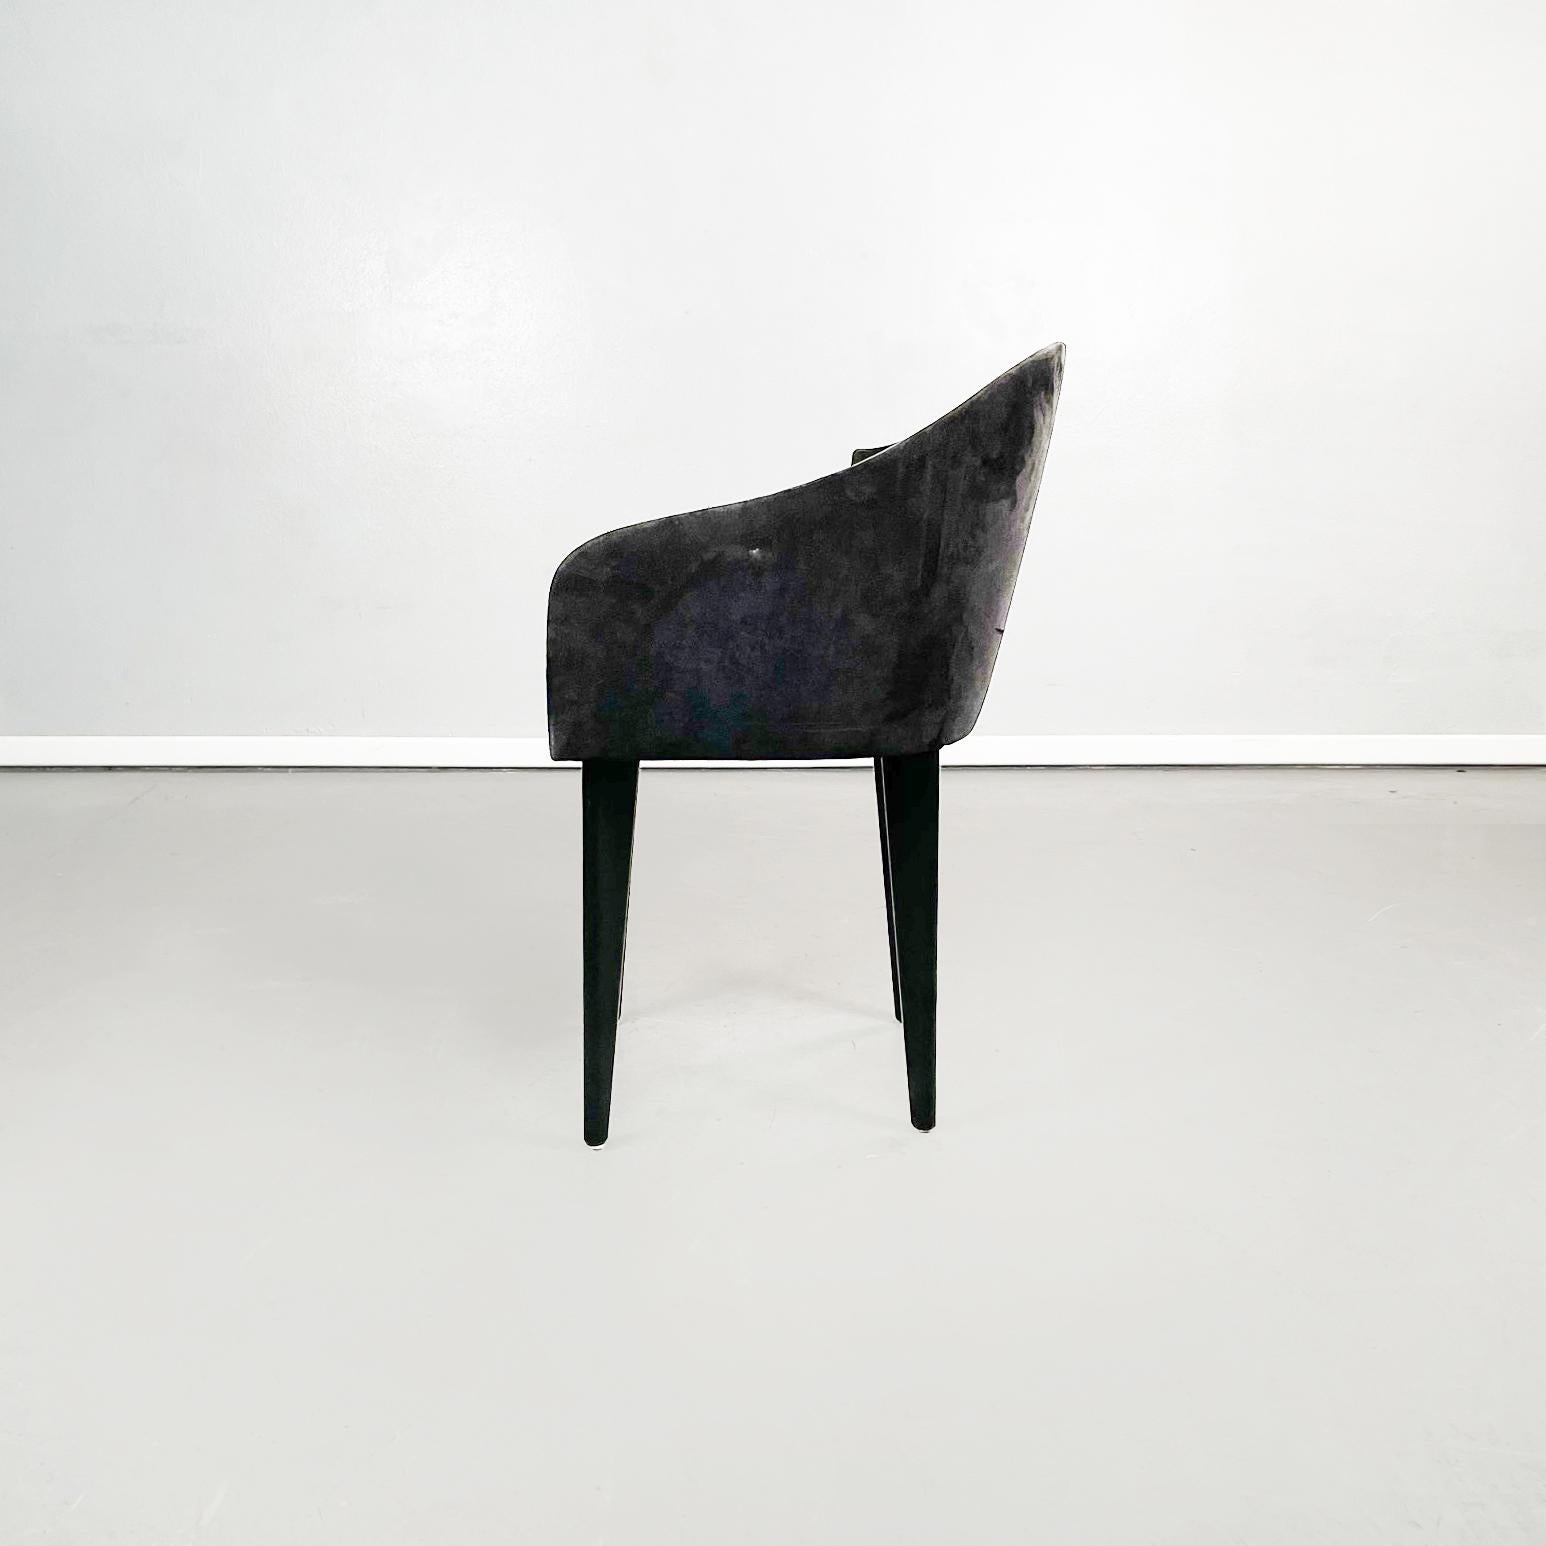 Italian Modern Black Chairs Toscana by Sartogo and Grenon for Saporiti, 1980s In Good Condition For Sale In MIlano, IT